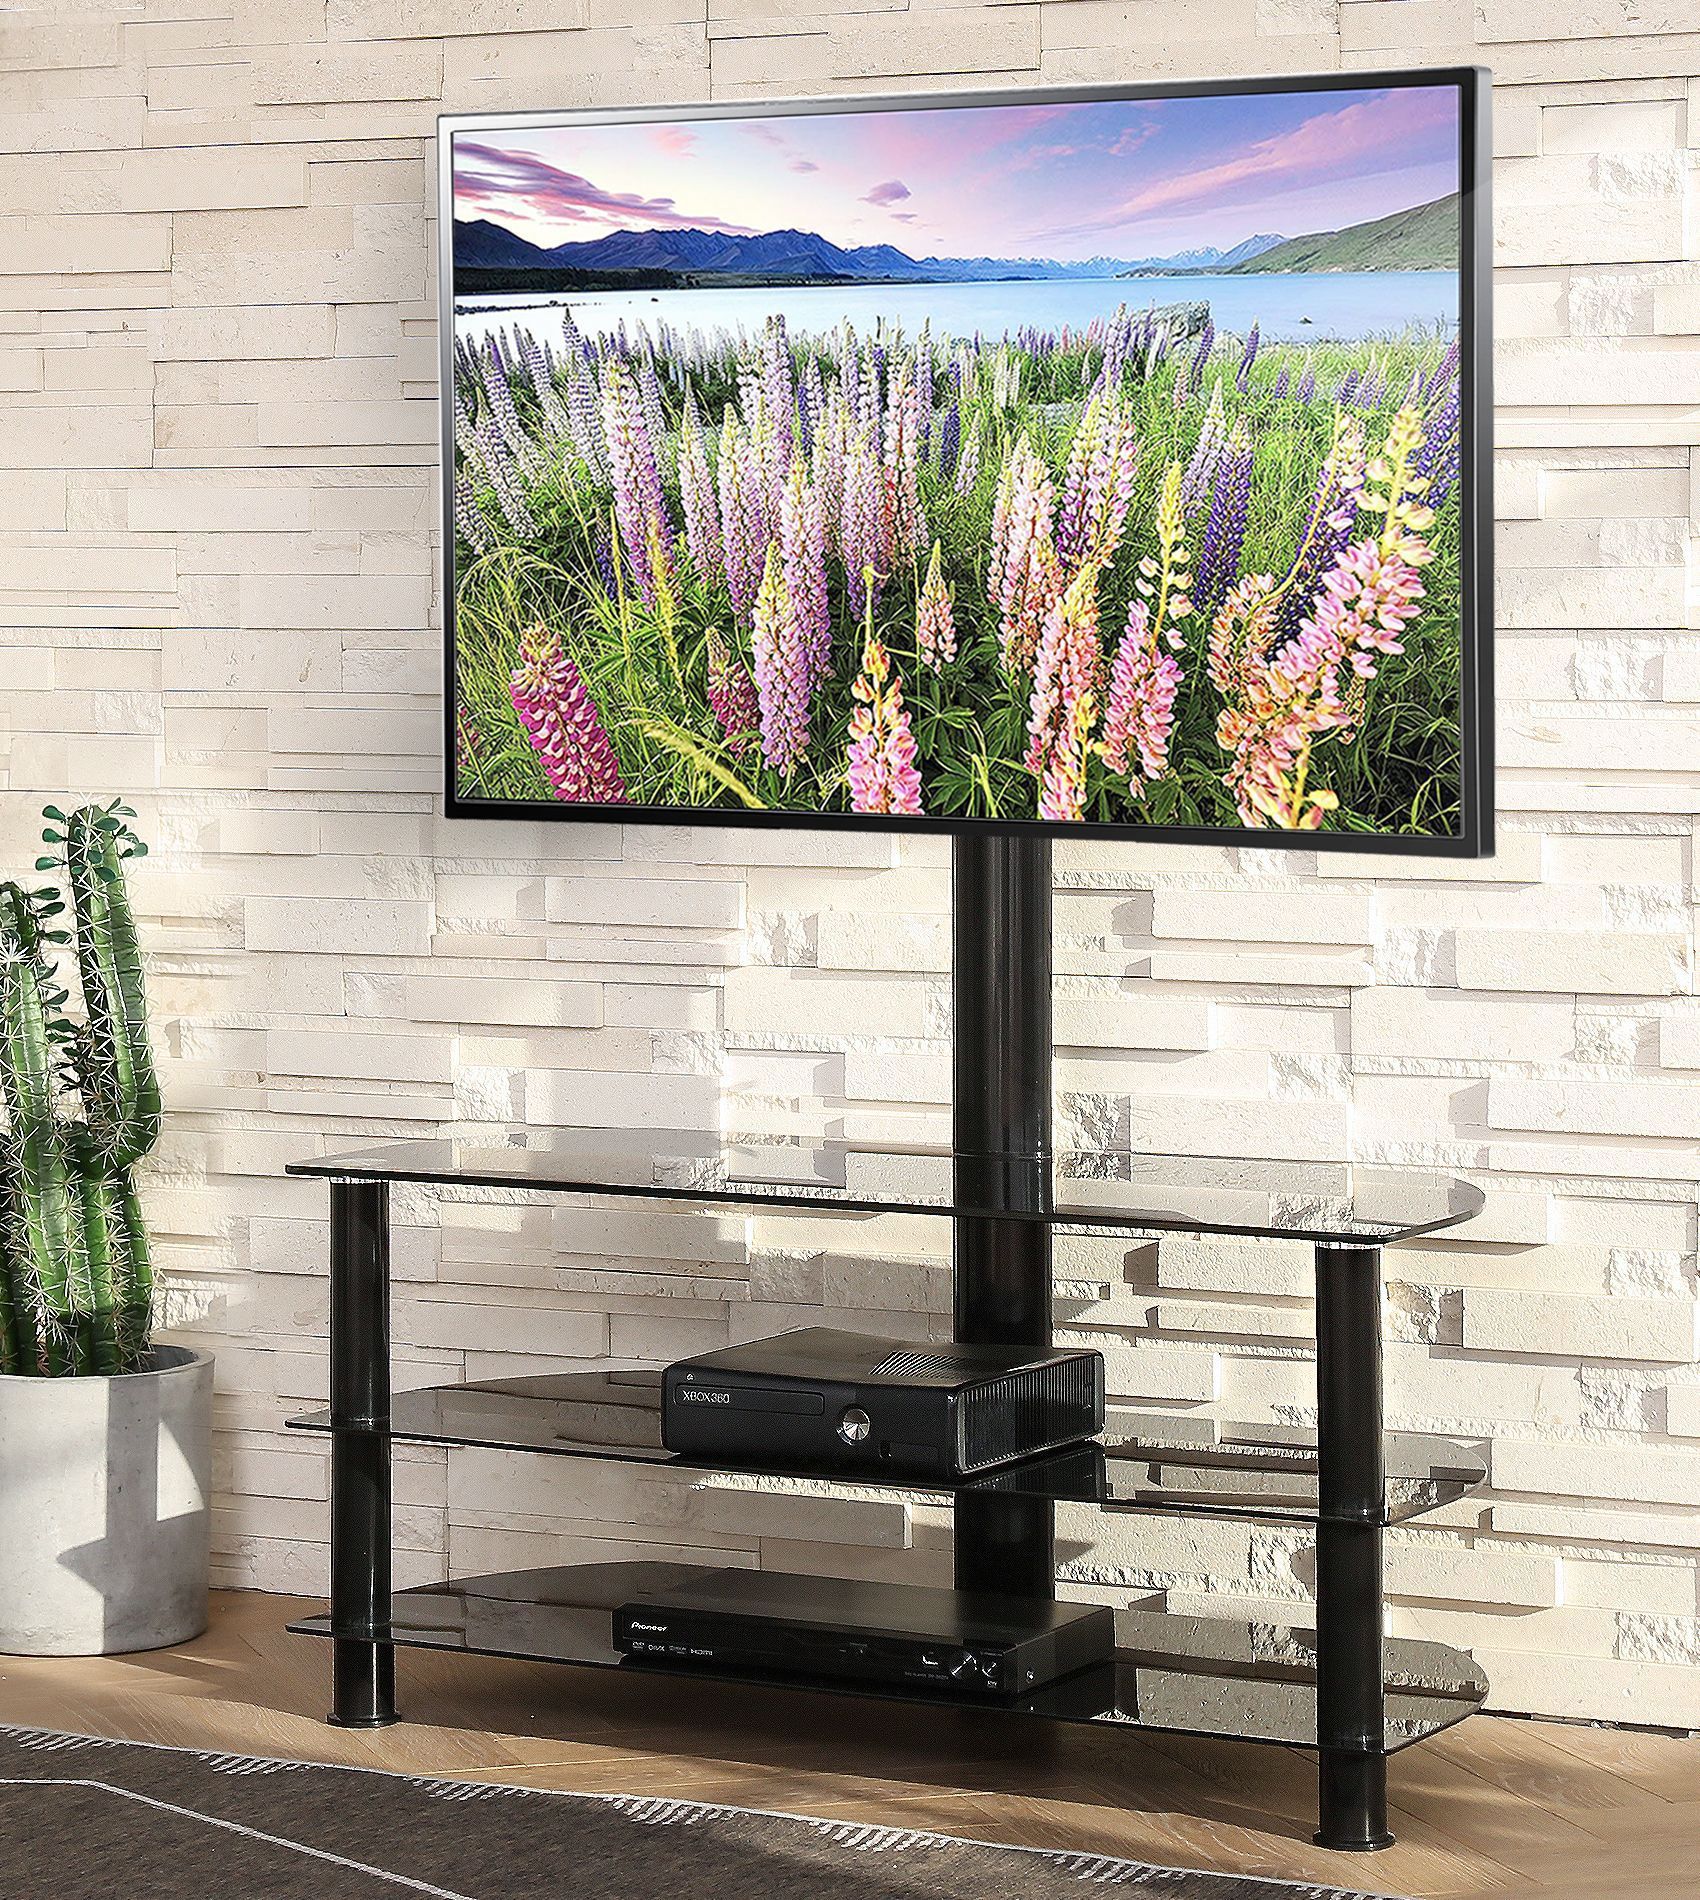 Swivel Floor Tv Stand With Mount, Height Adjustable 3 In 1 Pertaining To Modern Floor Tv Stands With Swivel Metal Mount (View 6 of 15)